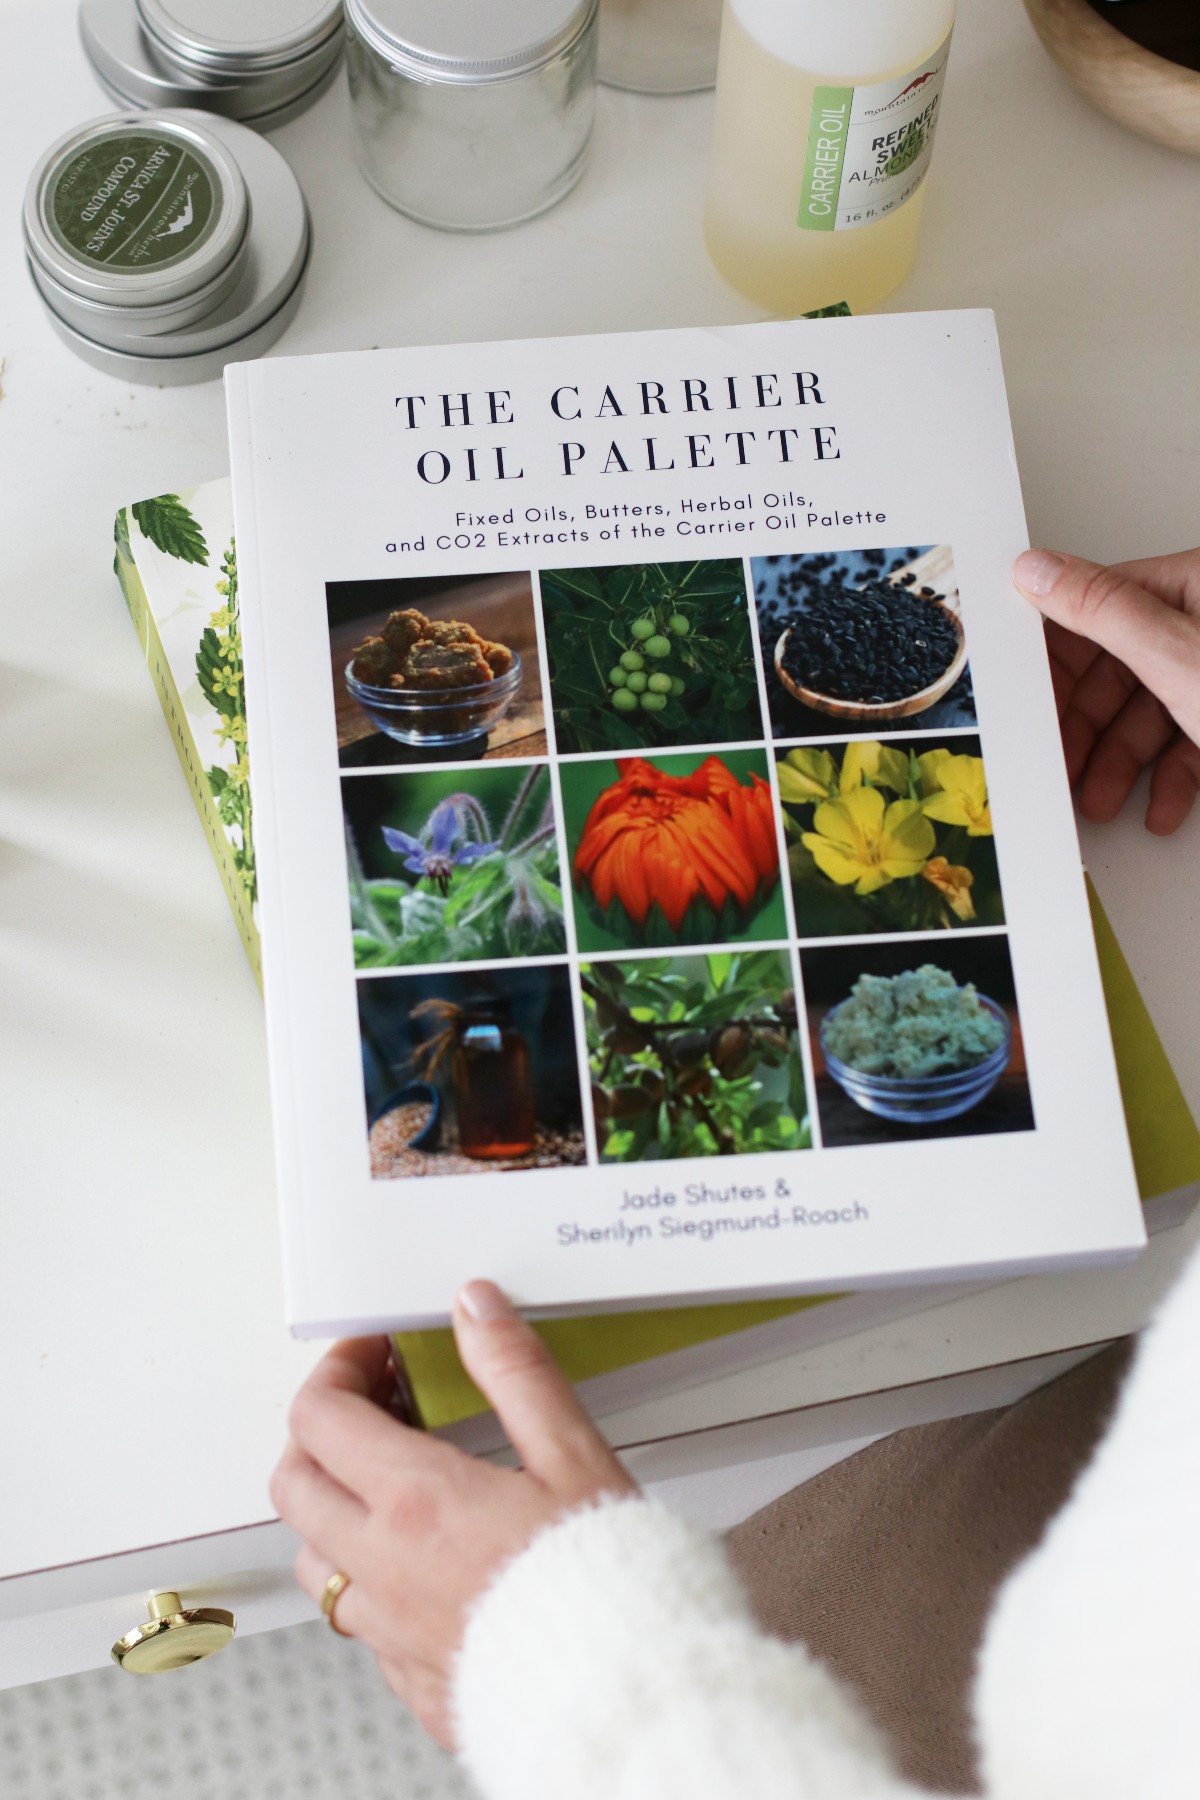 The Carrier Oil Palette book